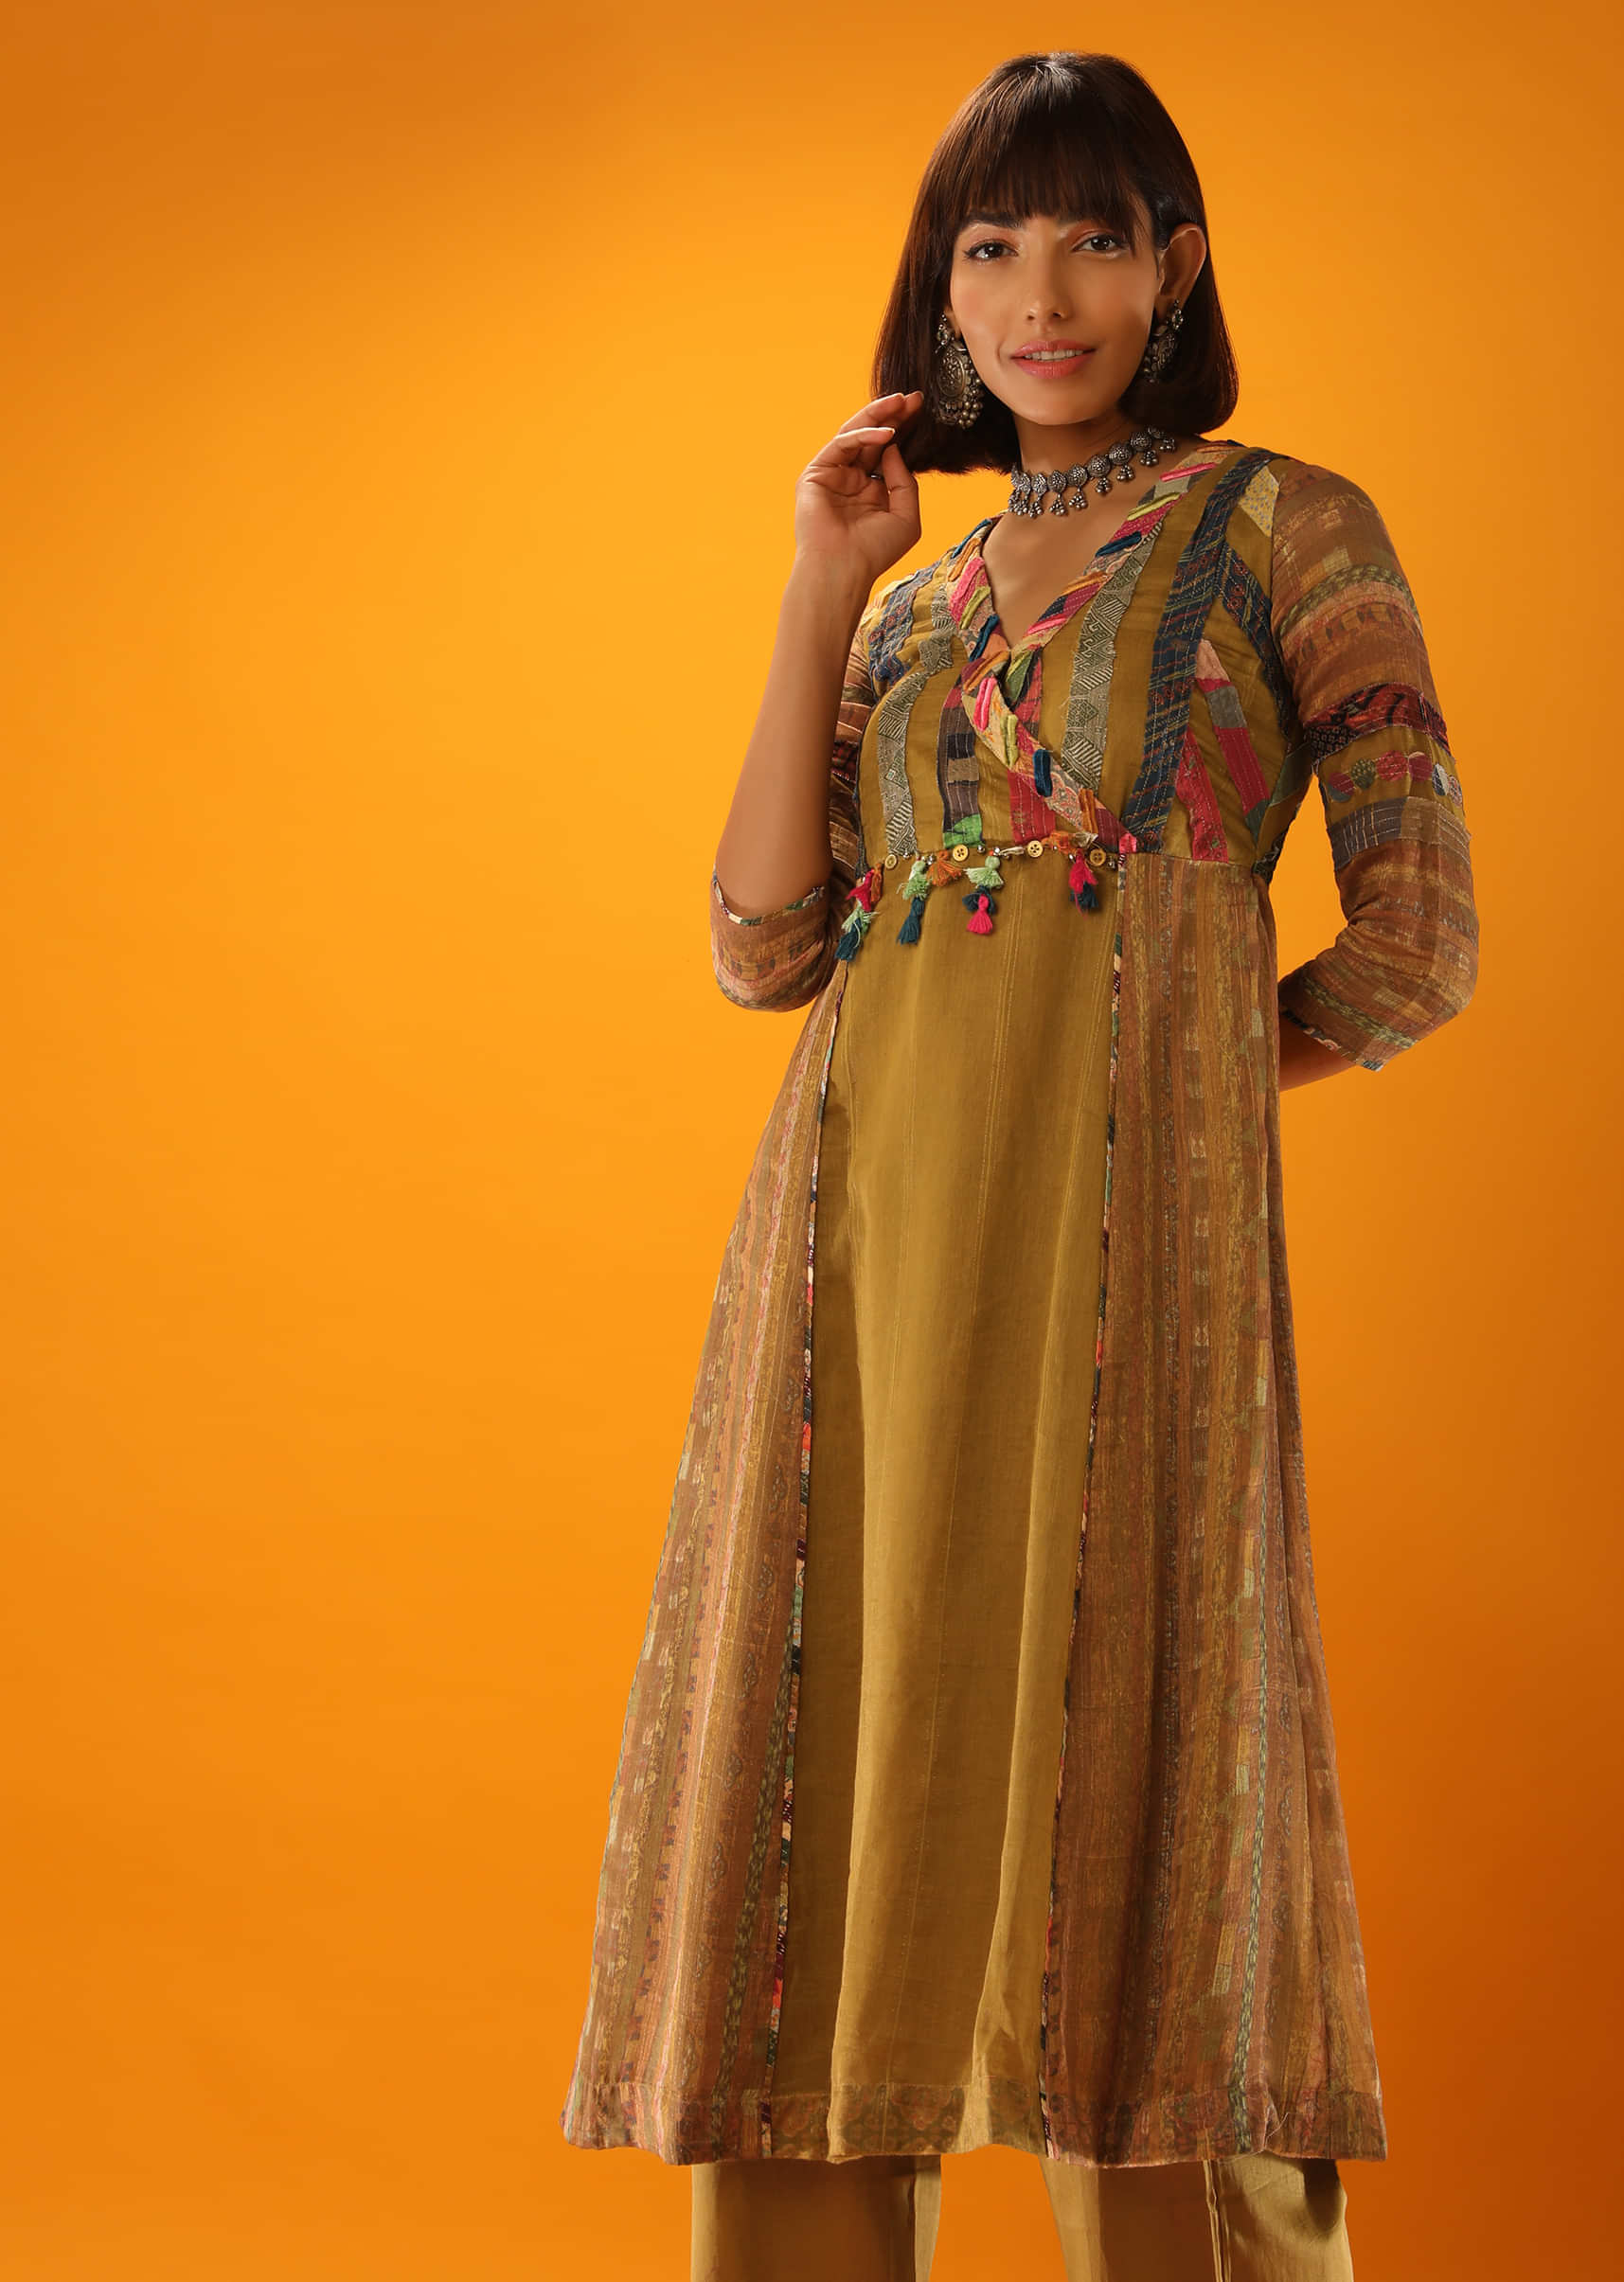 Ochre A Line Kurta And Palazzo Pants Set With Appliqued Stripes In Multi Colored Printed Fabric  